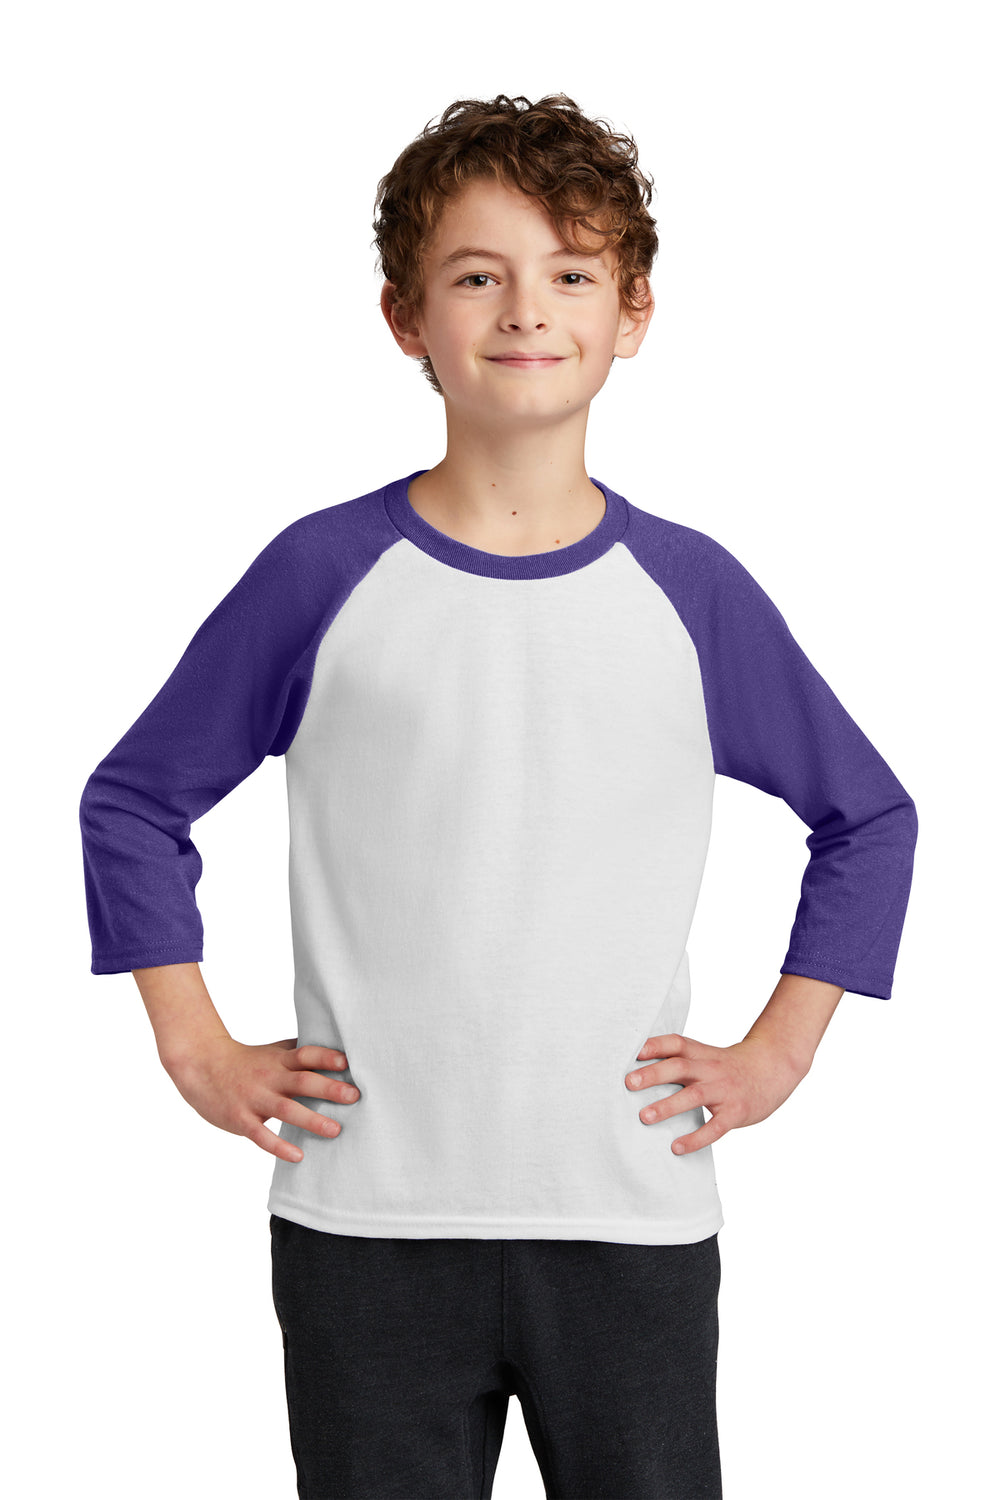 Youth Raglan - Purple Sleeve with Grey Body-Port & Company-Country Gone Crazy